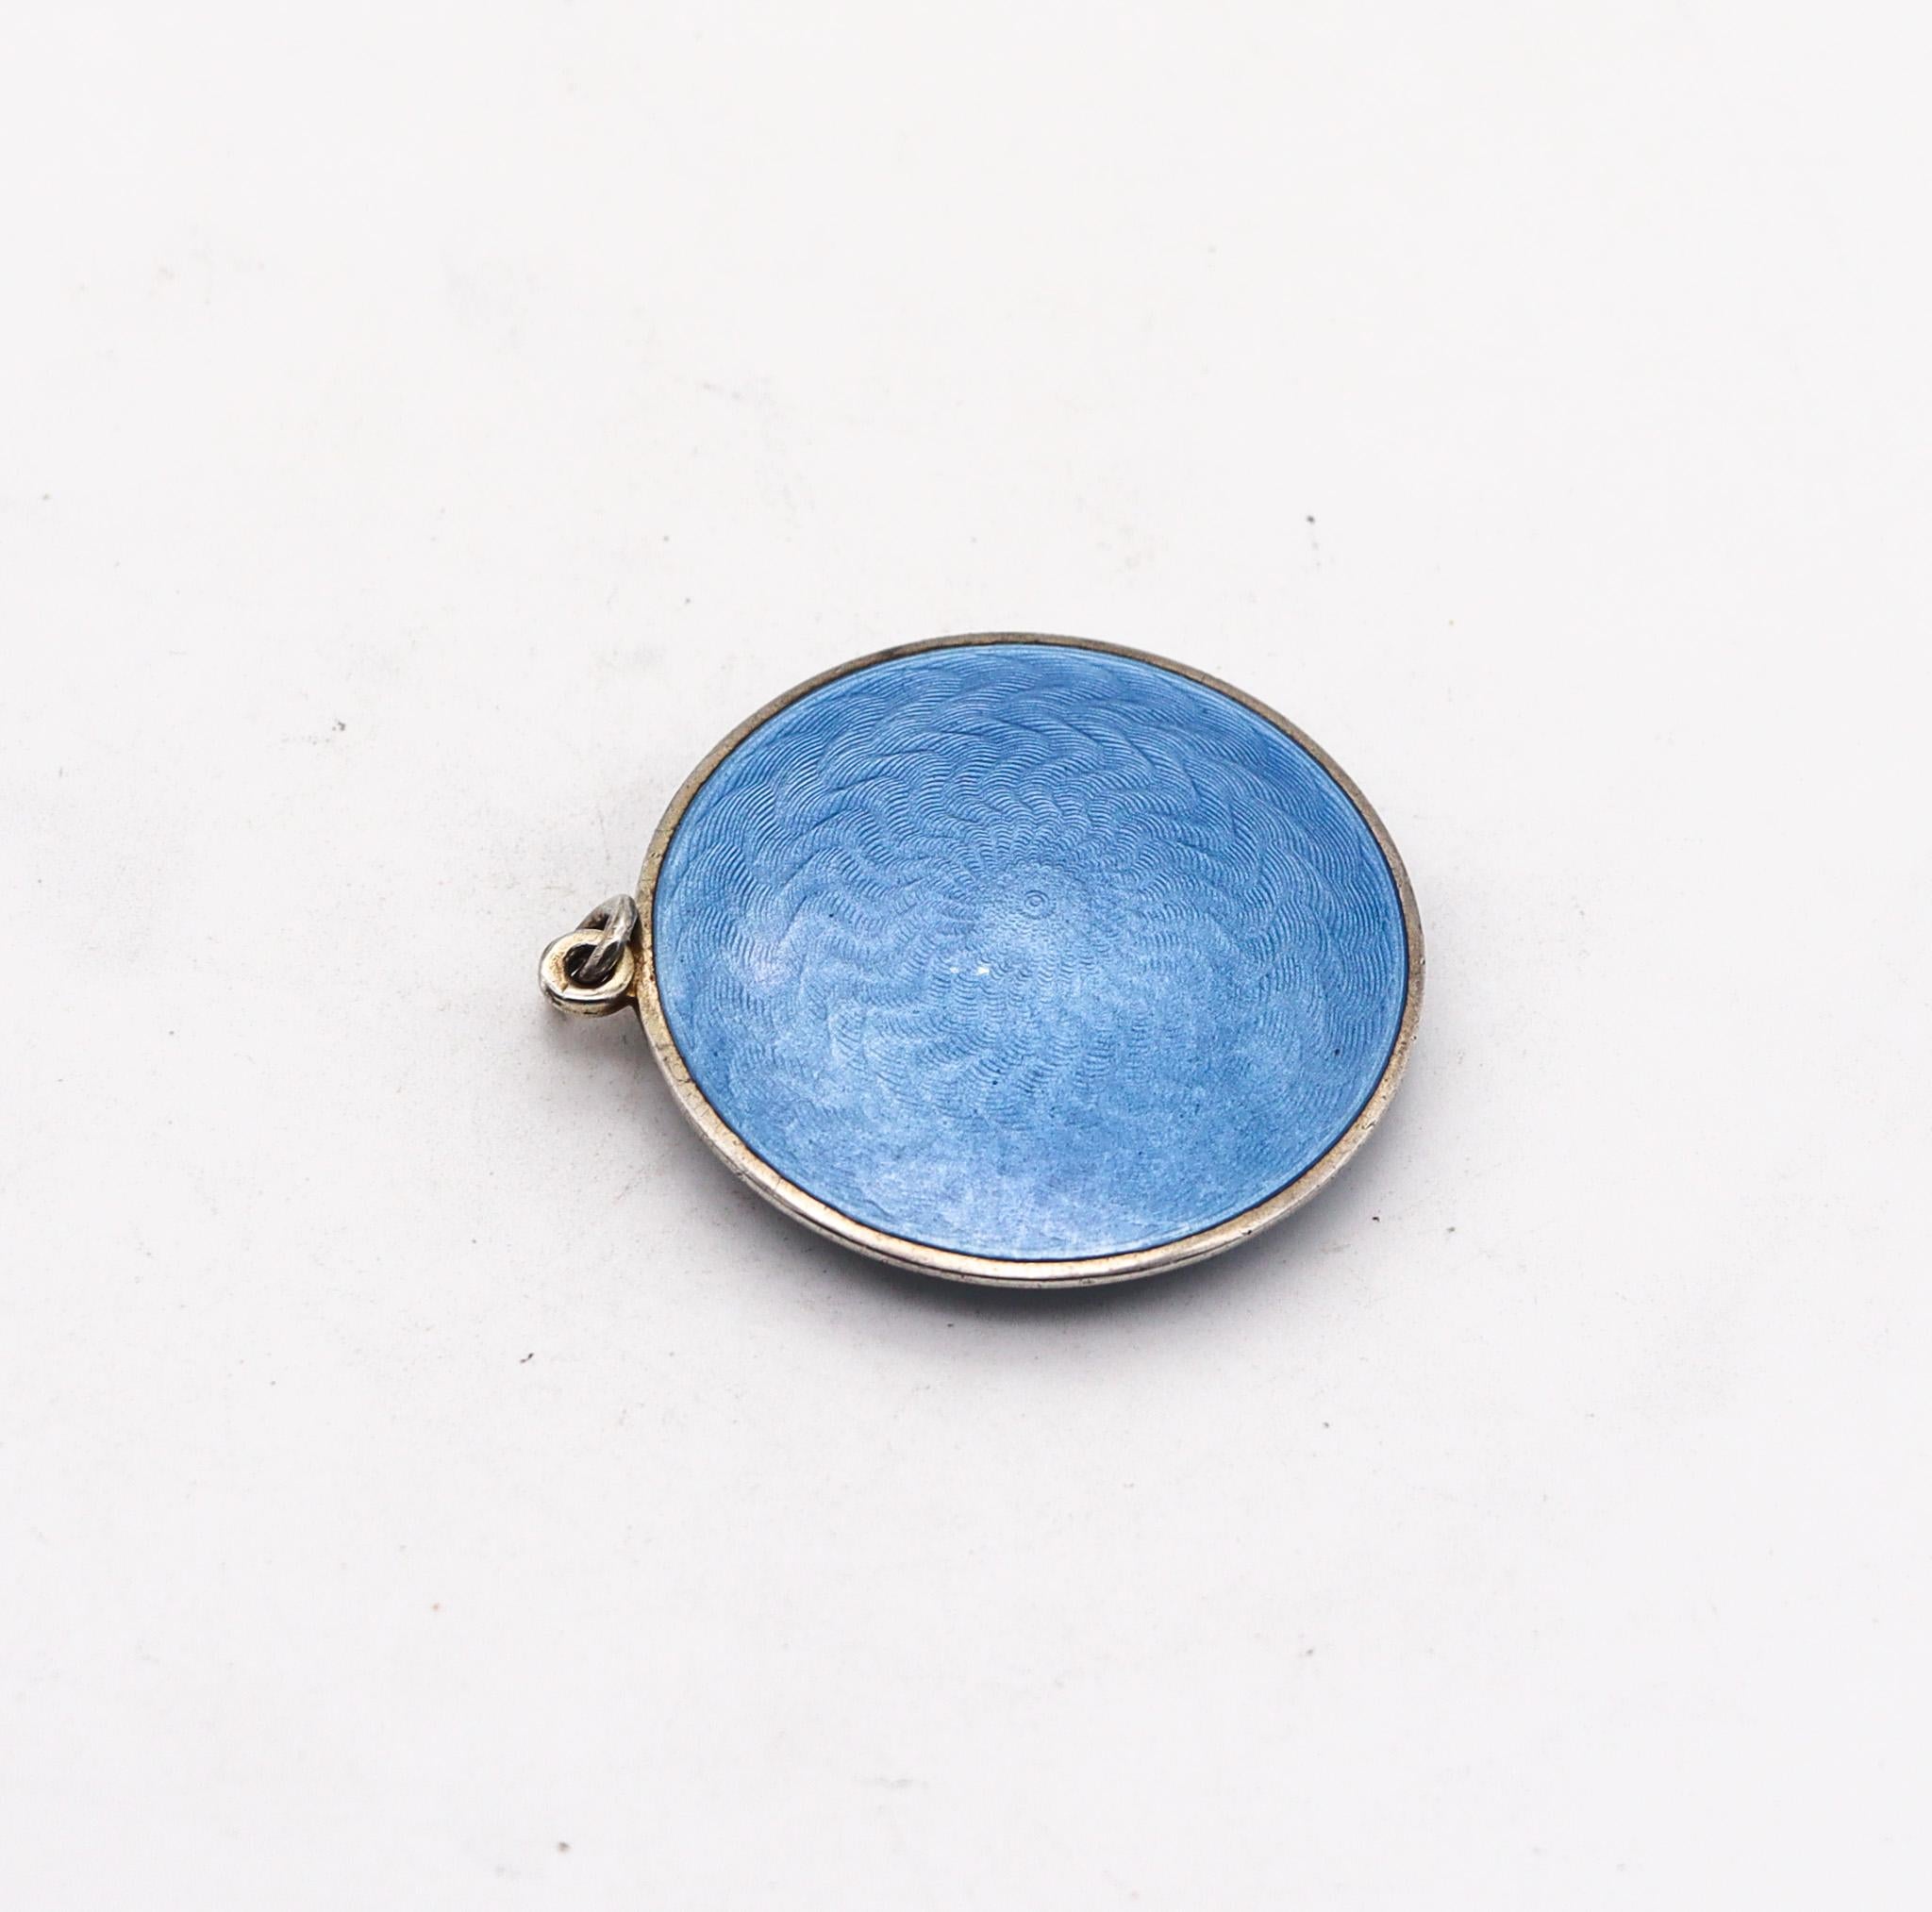 French 1910 Edwardian Blue Guilloche Enamel Pendant Locket 925 Sterling Silver In Excellent Condition For Sale In Miami, FL